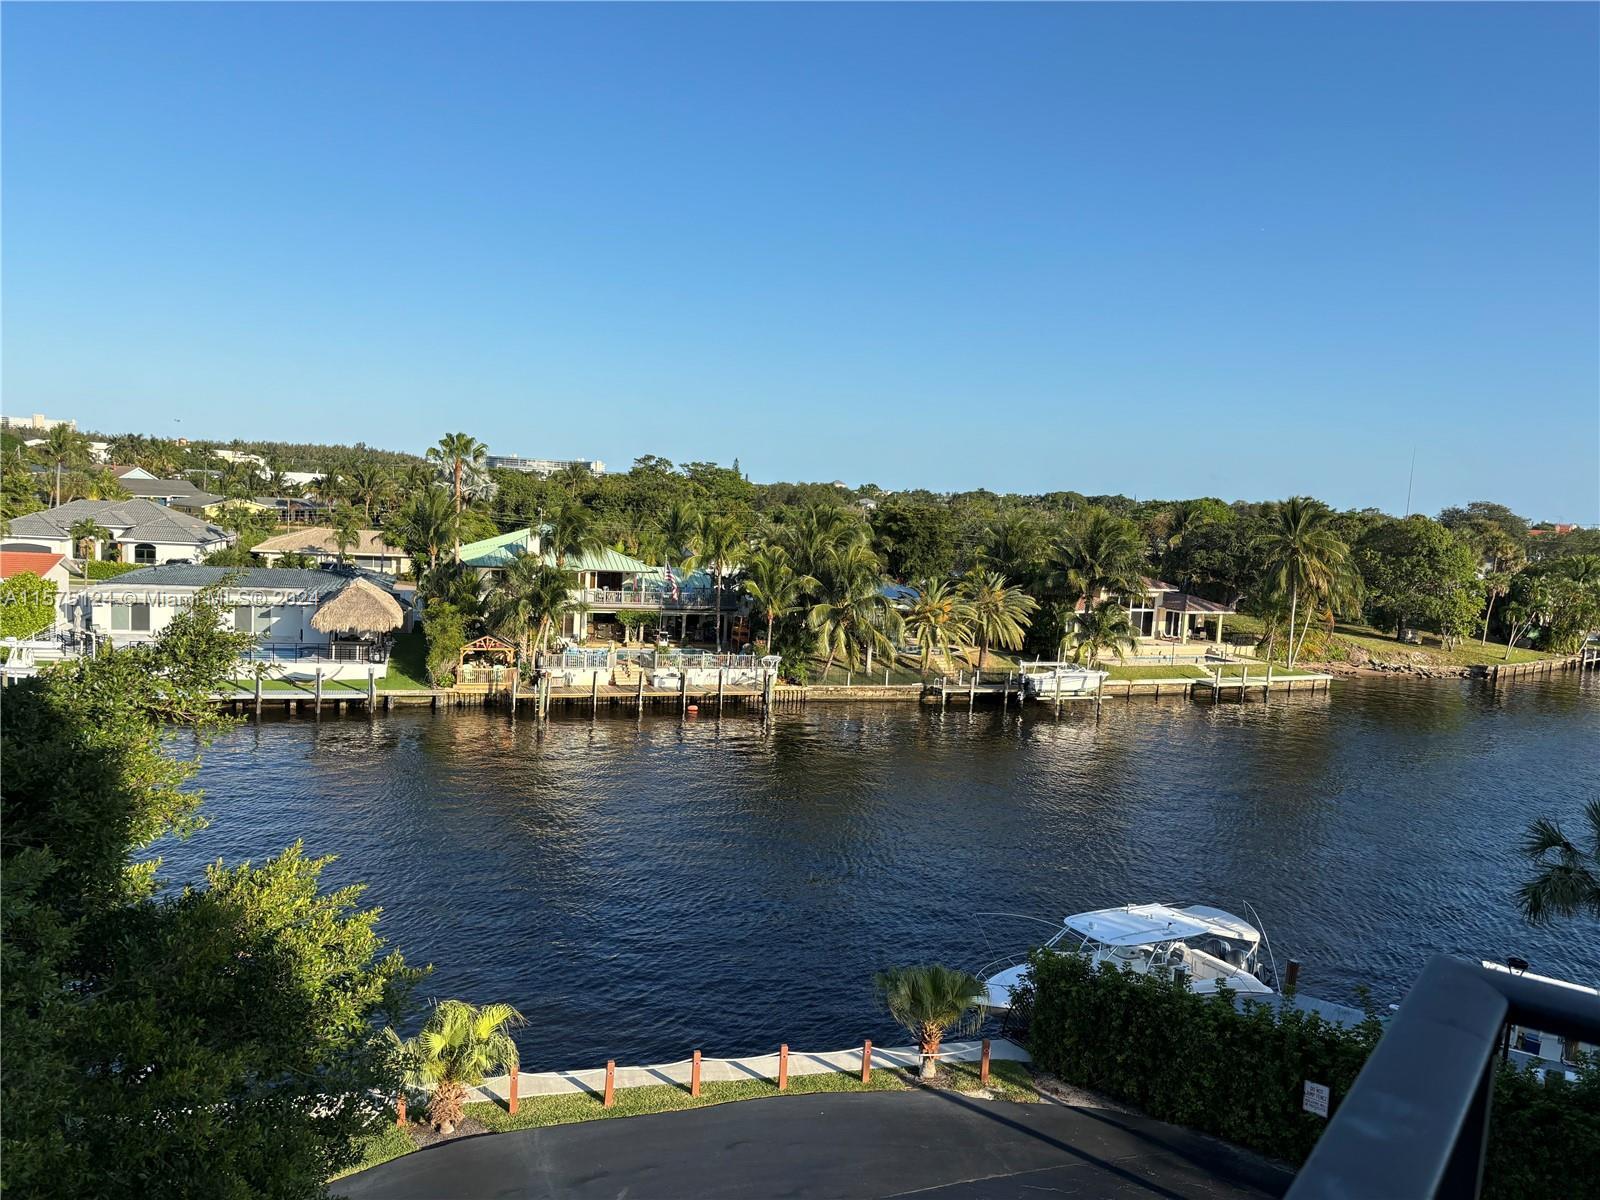 LOCATION, LOCATION. Welcome to Boca's boaters hidden jewel! This spacious and bright 2/2 condo, offe